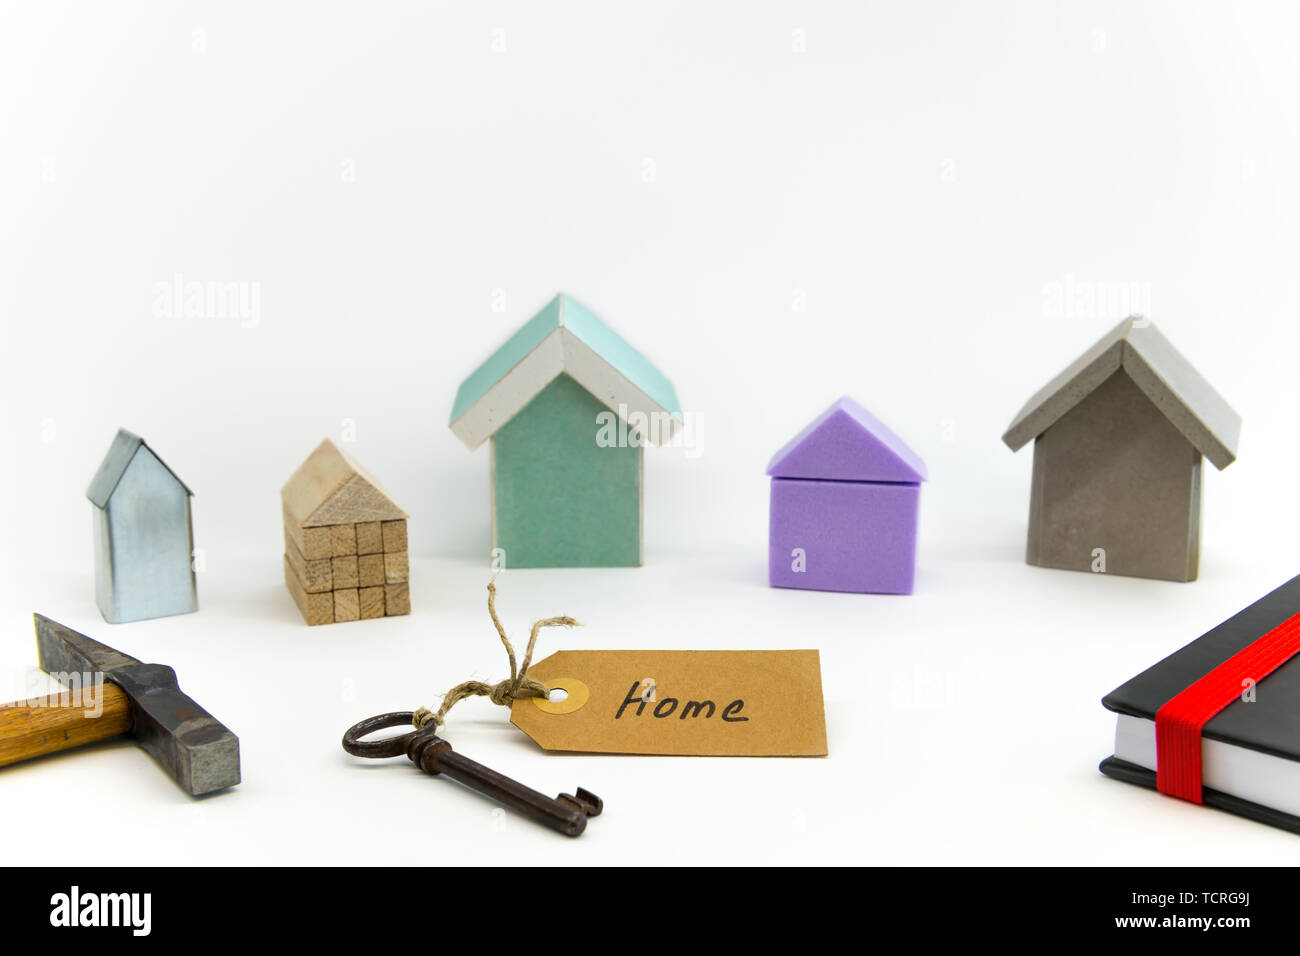 Five small houses made of different materials. Key with shield, hammer and book in the foreground. Stock Photo